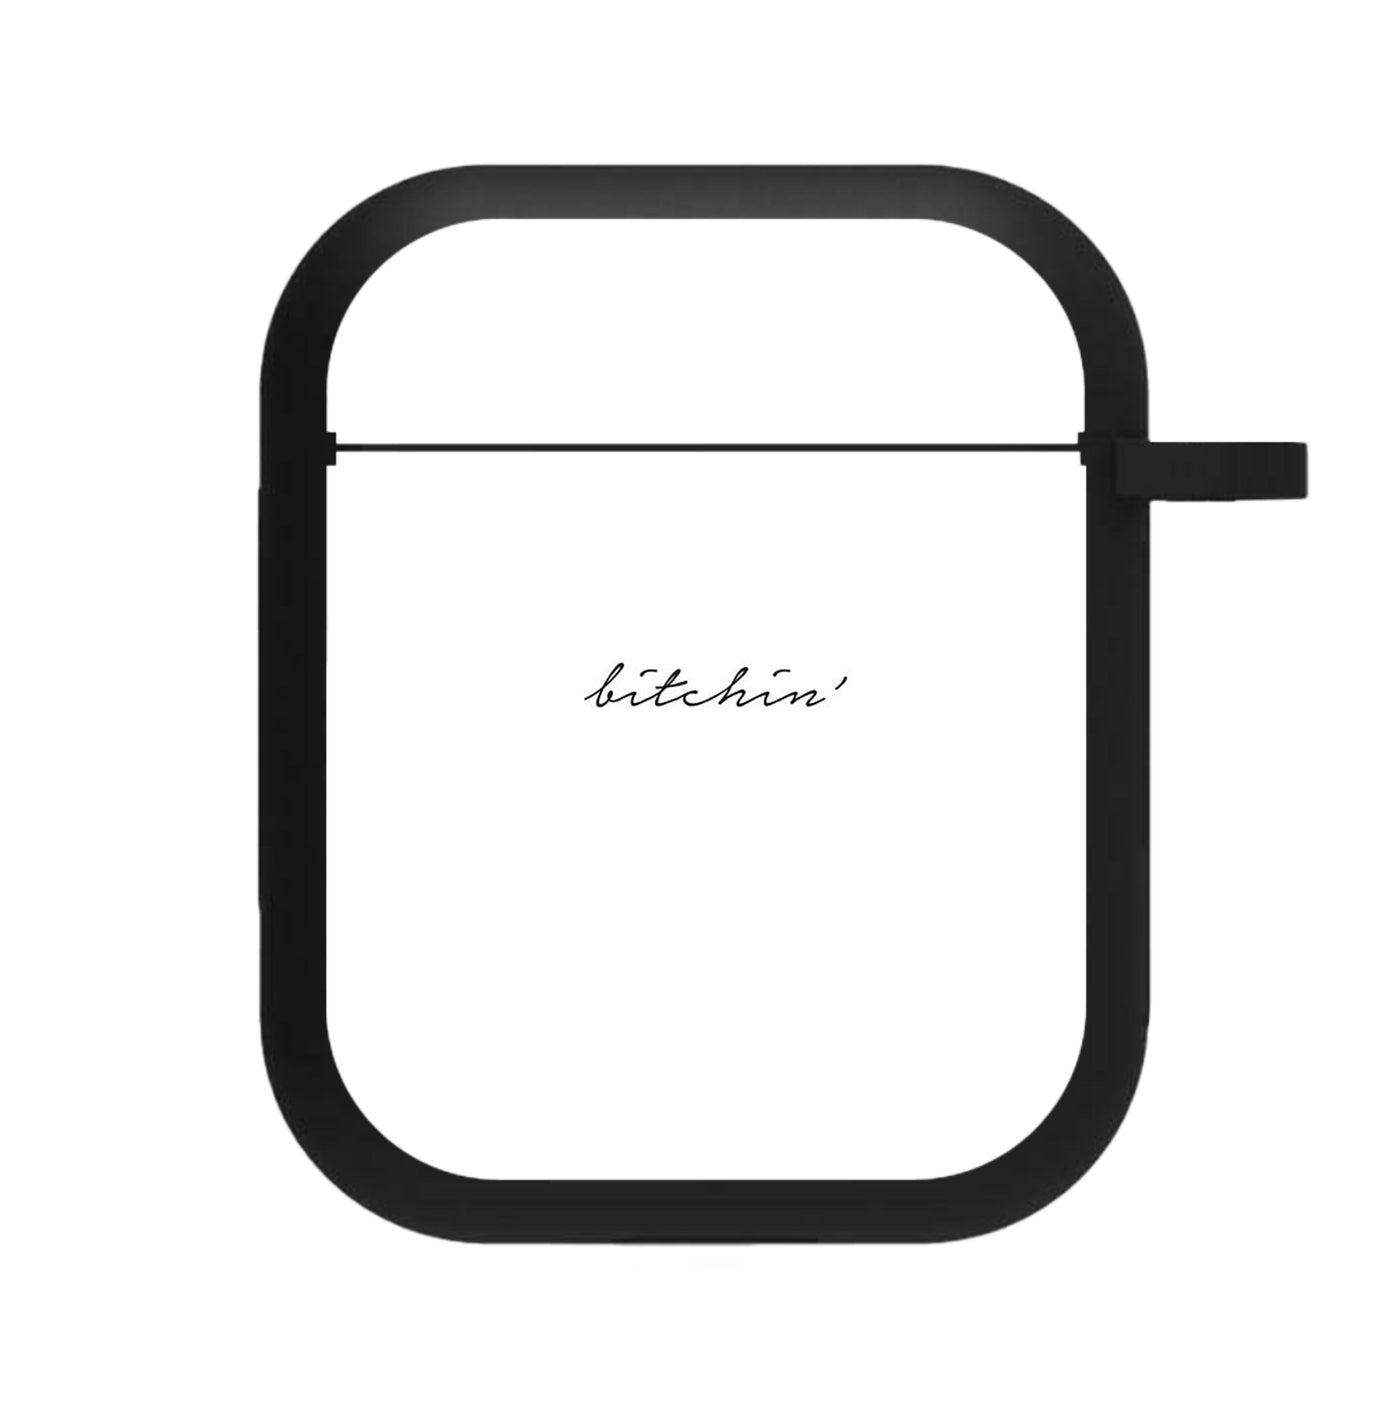 Bitchin' - White Stranger Things AirPods Case